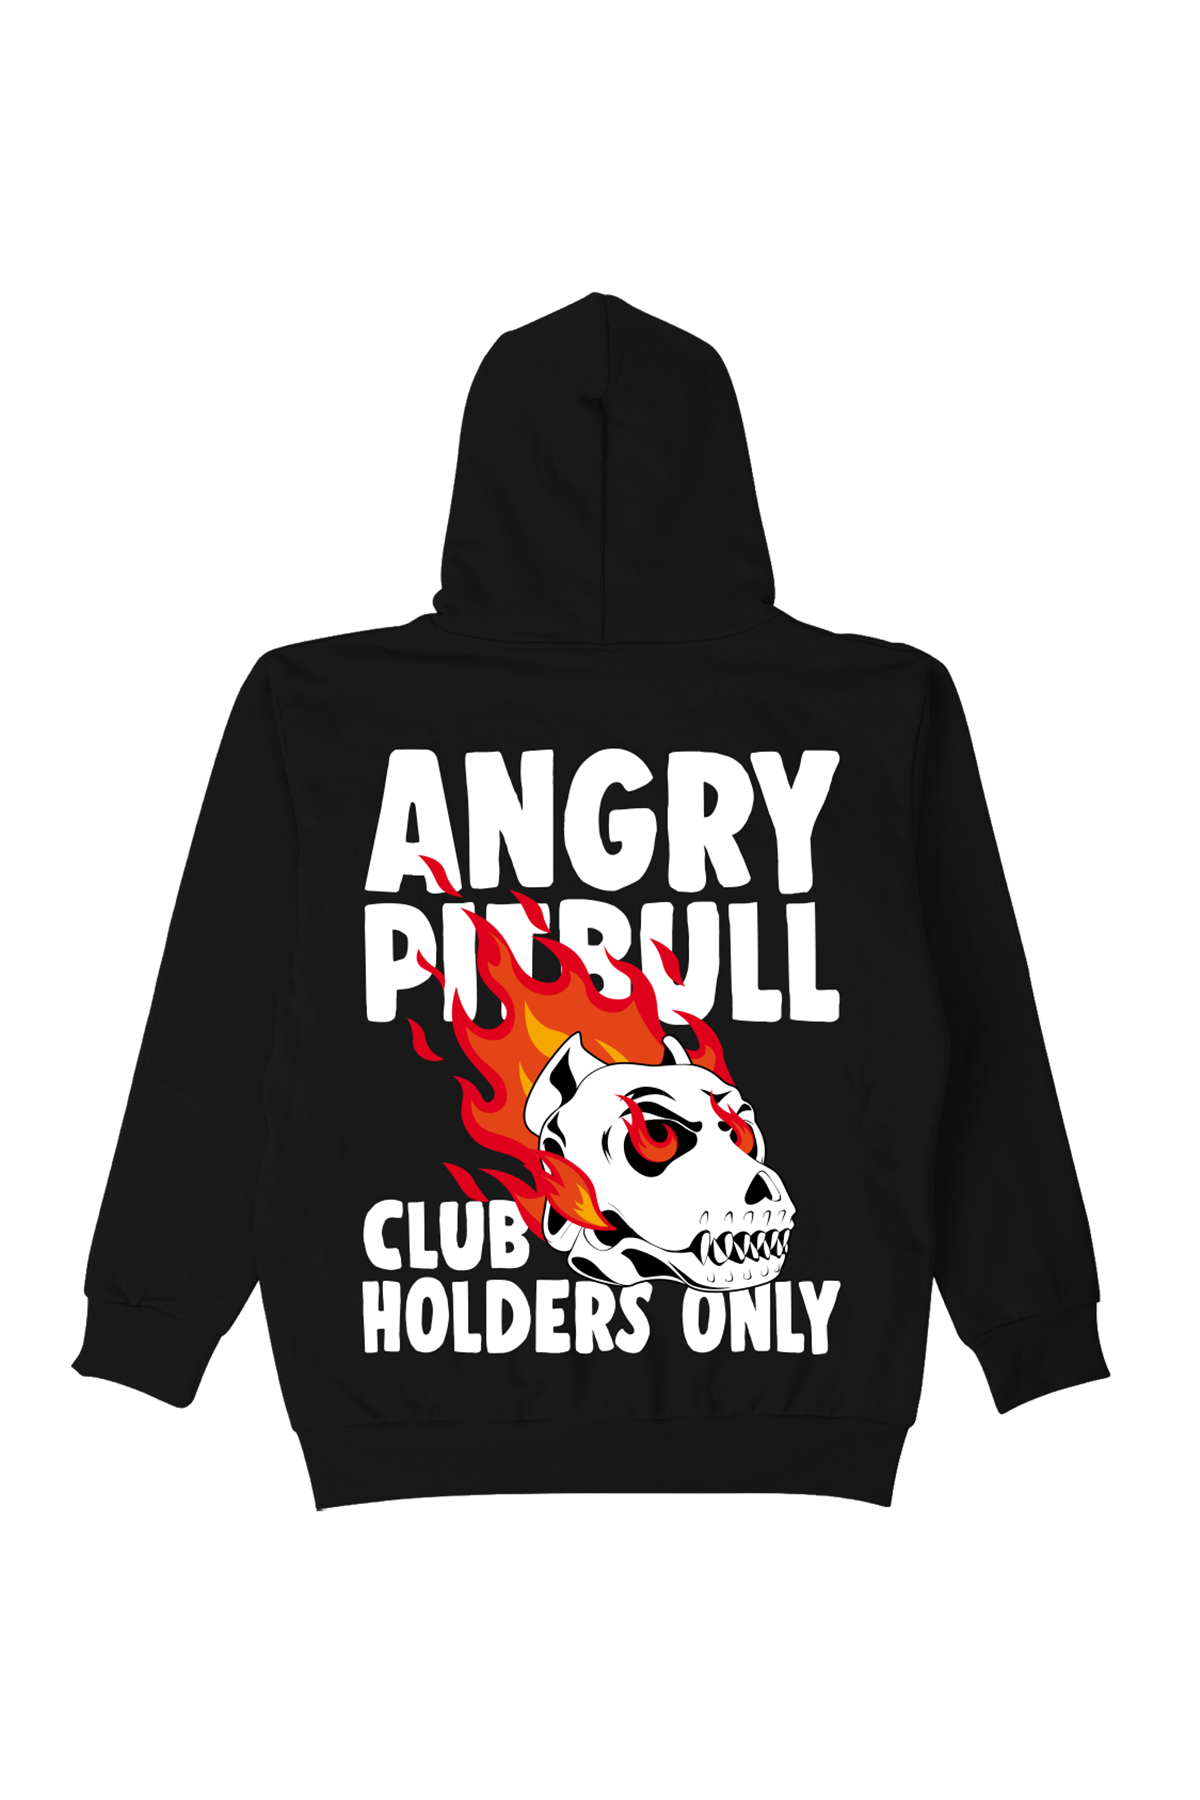 Holders Only Hoodie - Black – ANGRY PITBULL CLUB